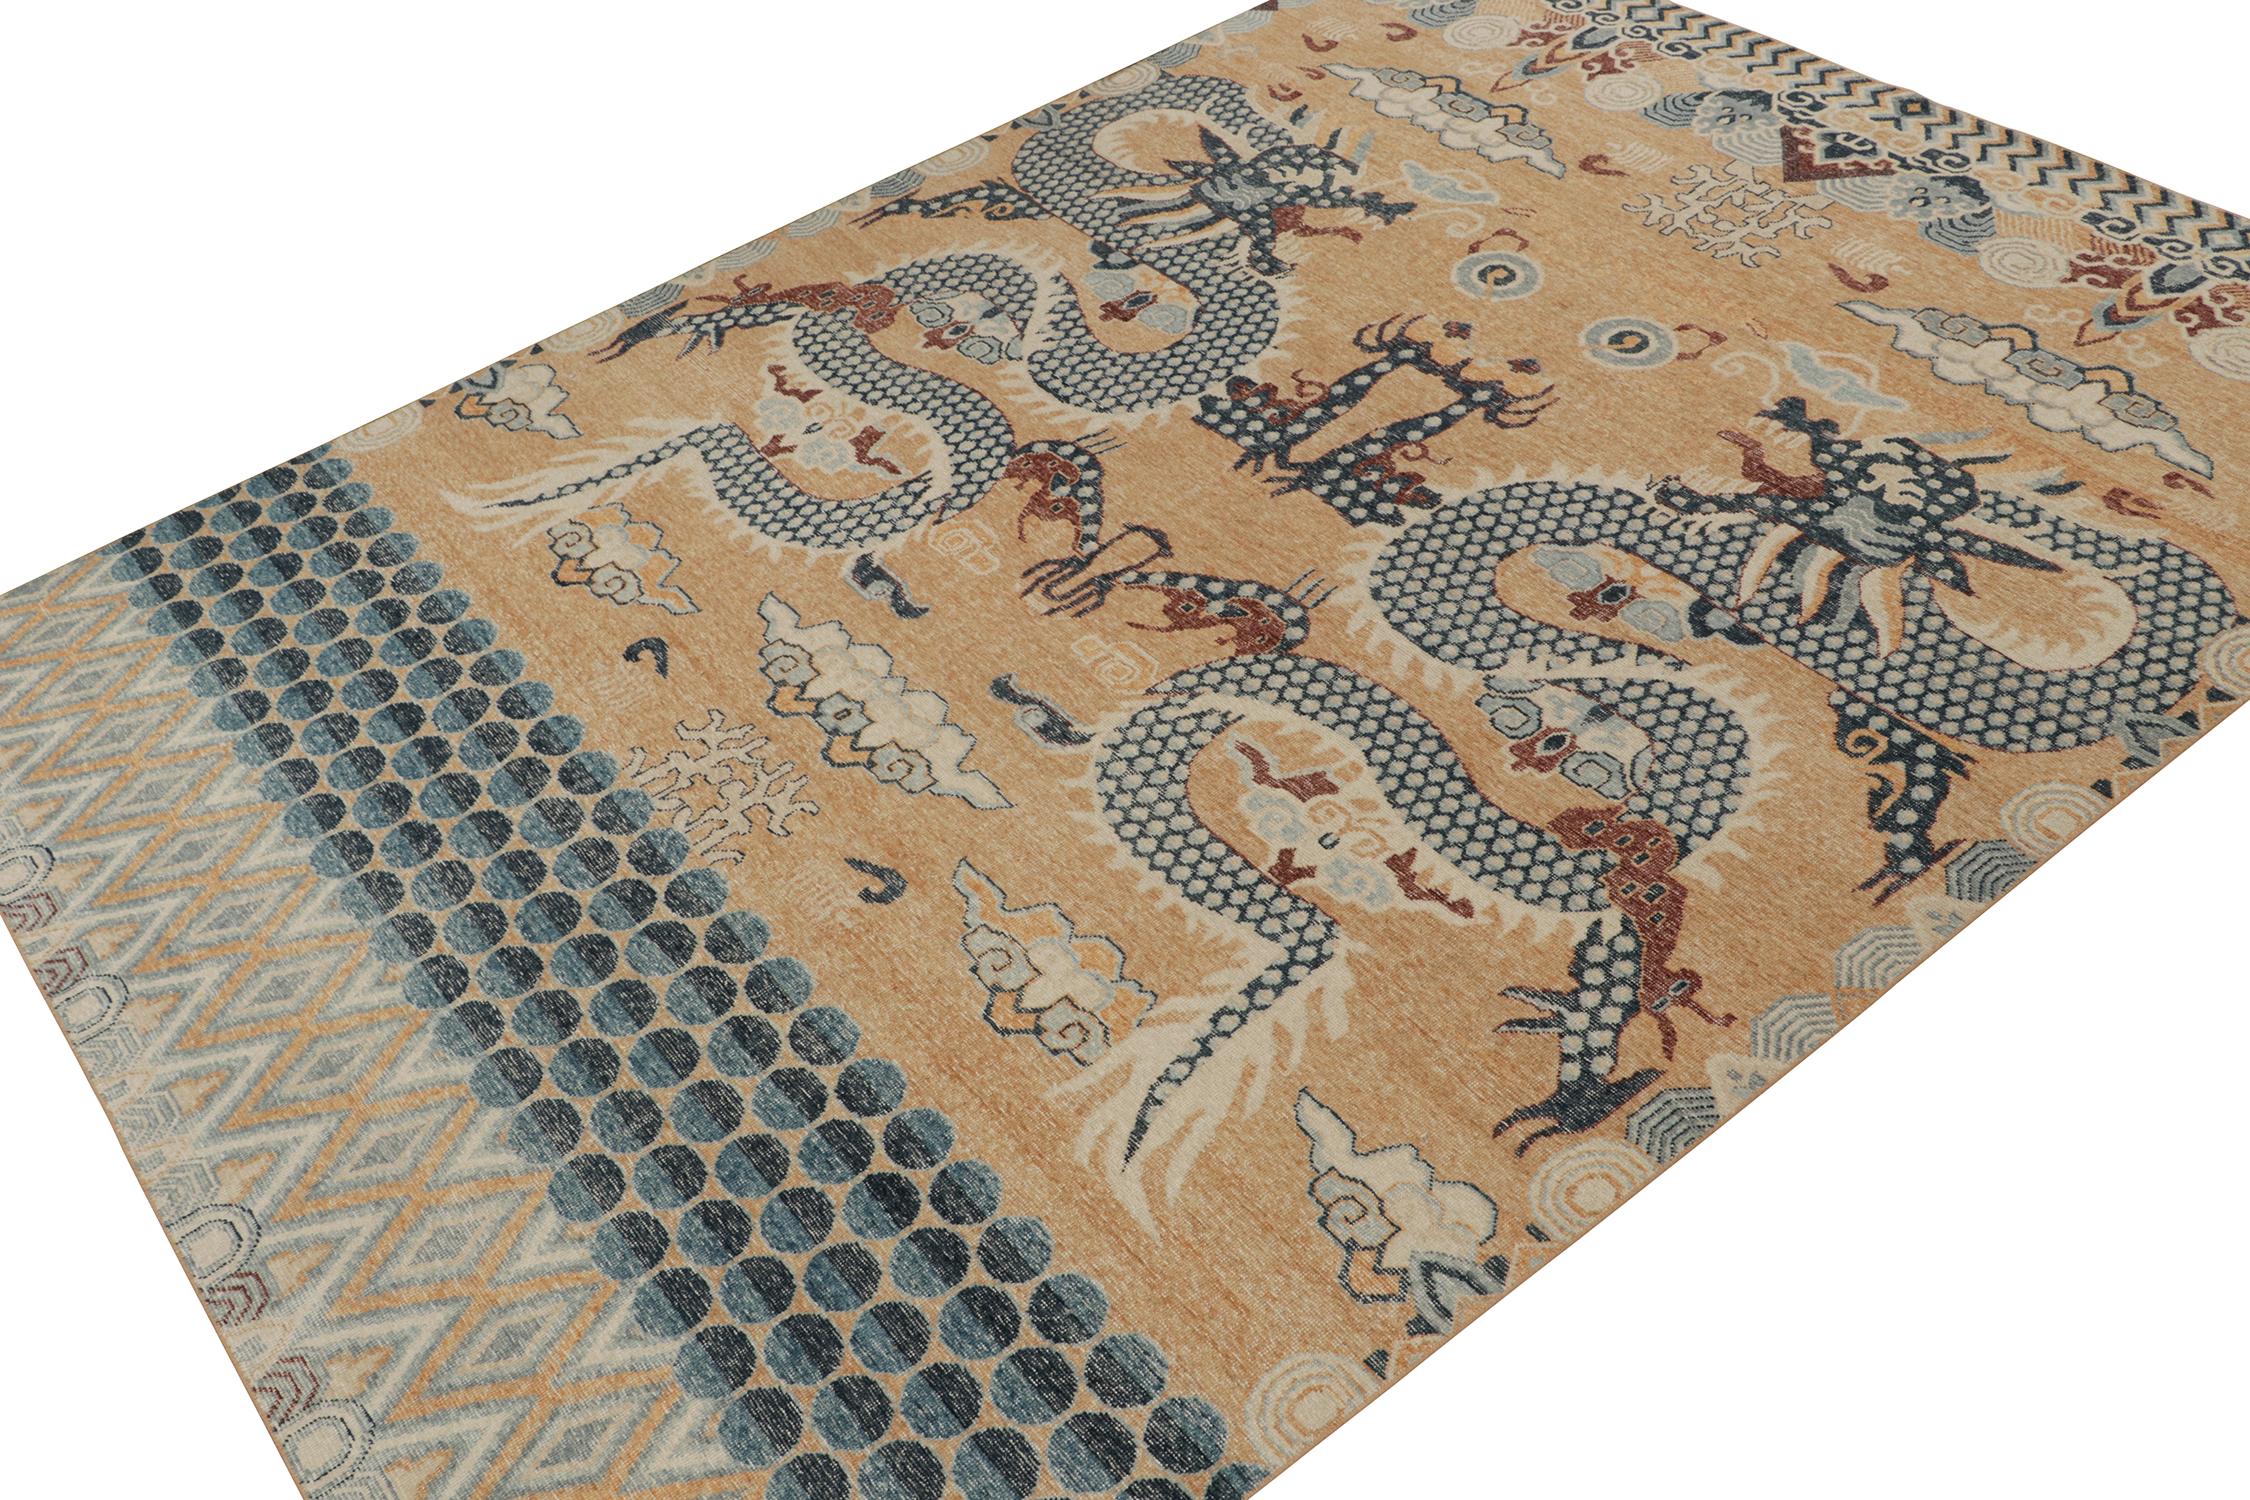 This 10x14 rug from Rug & Kilim’s Homage Collection recaptures the time-honored dragon rug in its glory and rare beauty. Hand-knotted in wool and cotton, our construction is an easy-to-maintain, comfortable wash with great value and approachable,